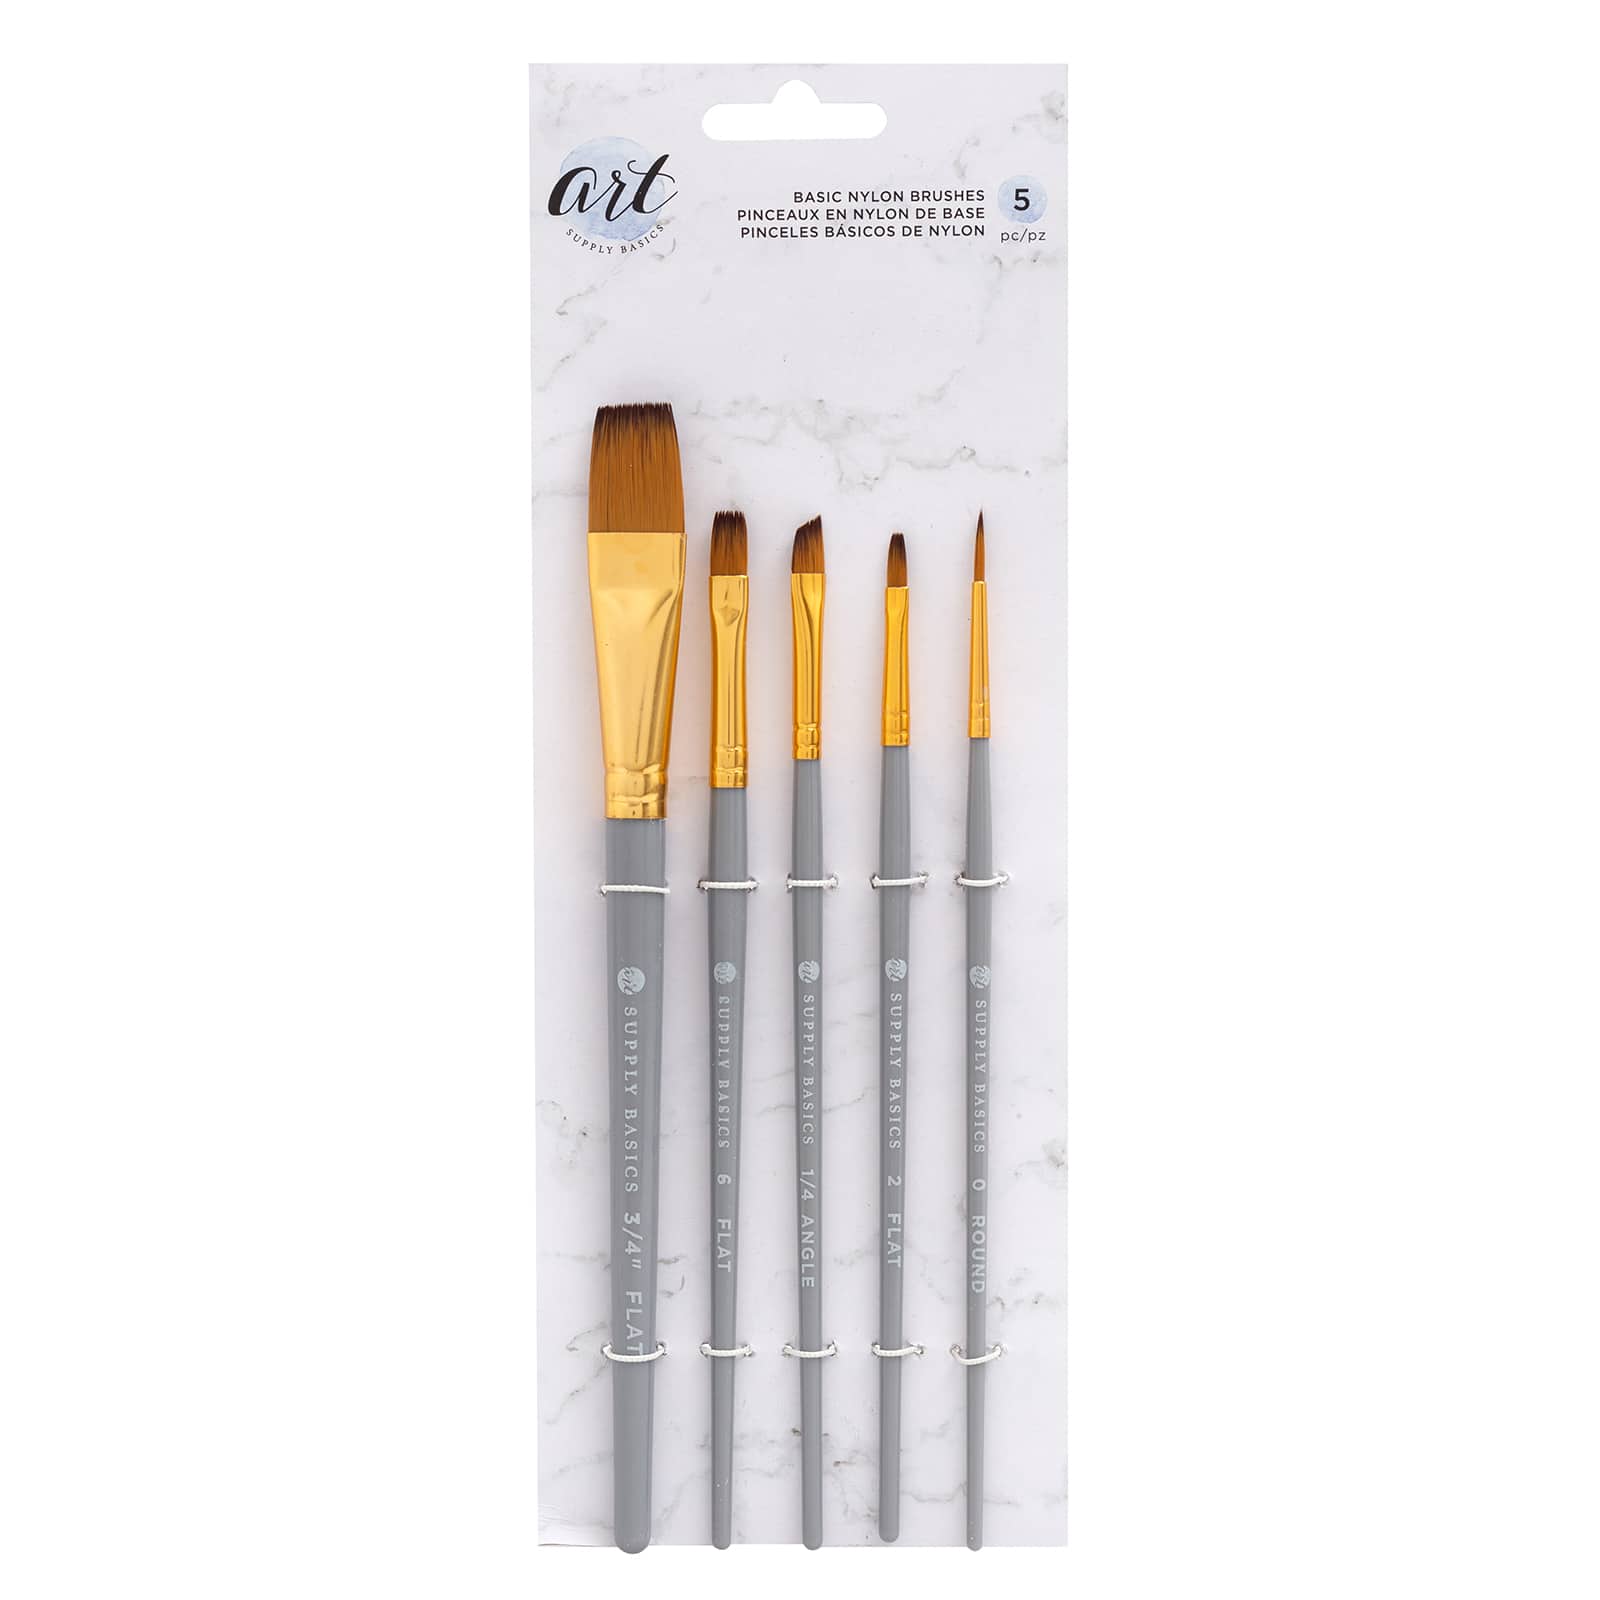 Citadel Brushes, Tools & Accessories - The Art Store/Commercial Art Supply